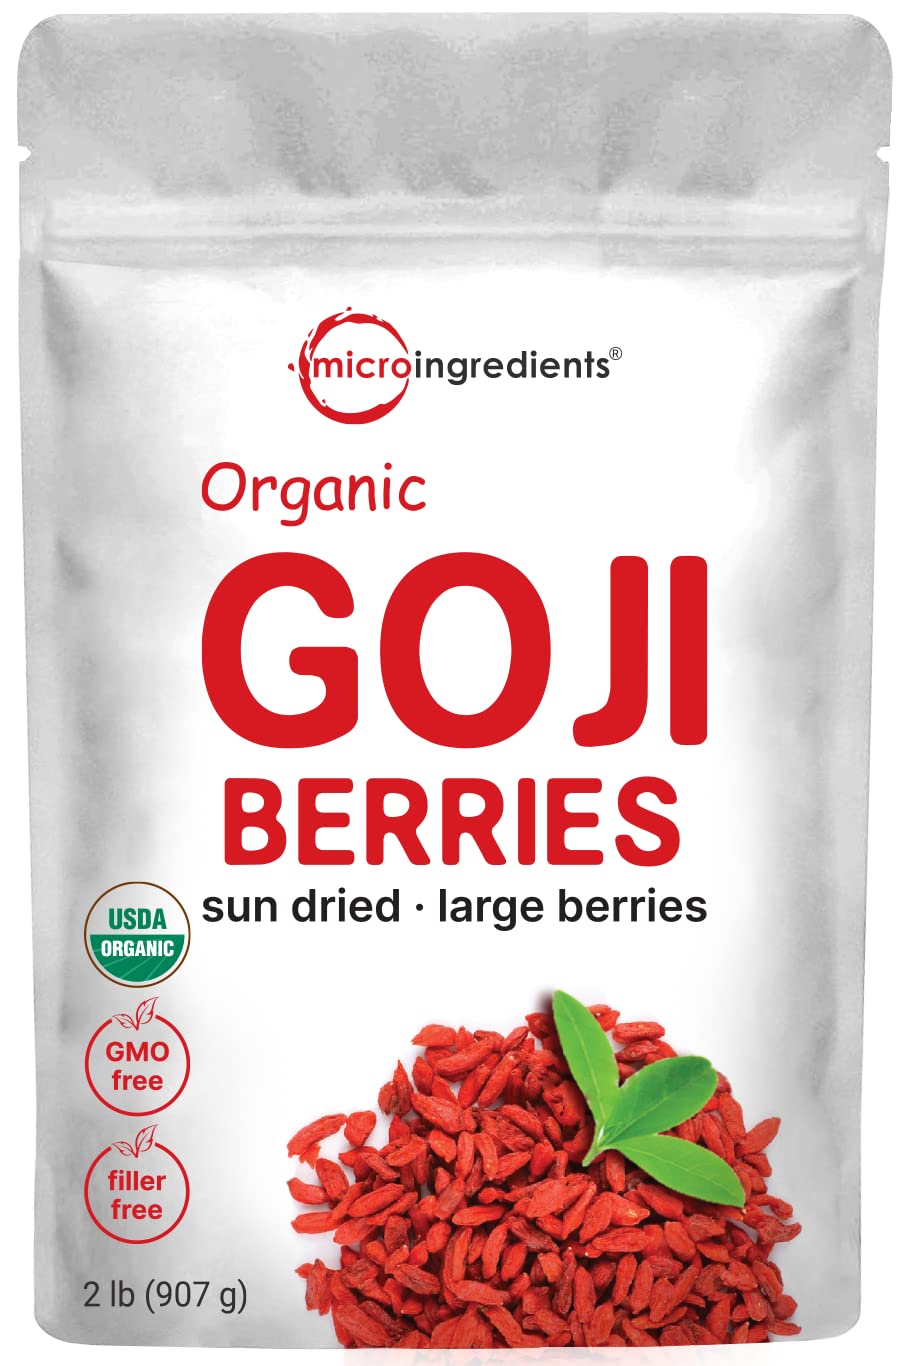 Organic Goji Berries, 32 Ounces | 100% Natural Sun-Dried Whole Fruit | Sulfate & Additive Free | Large Berry Form, Great Flavor for Drinks, Snacks, & Beverages | Non-GMO & Vegan